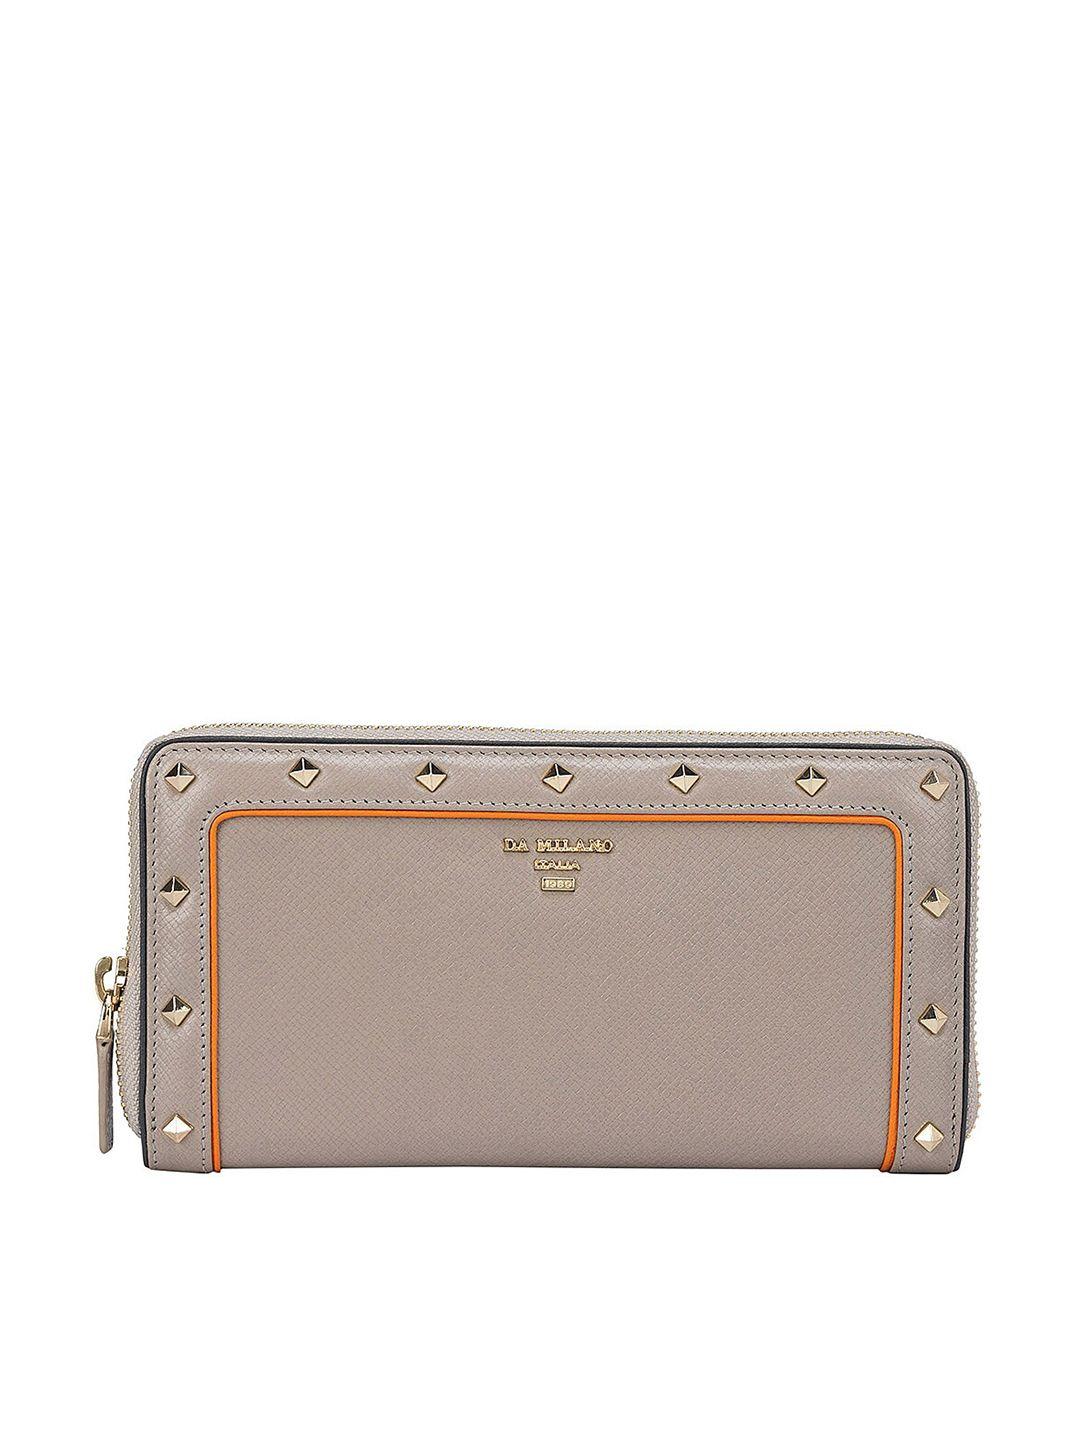 da milano women beige & gold-toned textured leather two fold wallet